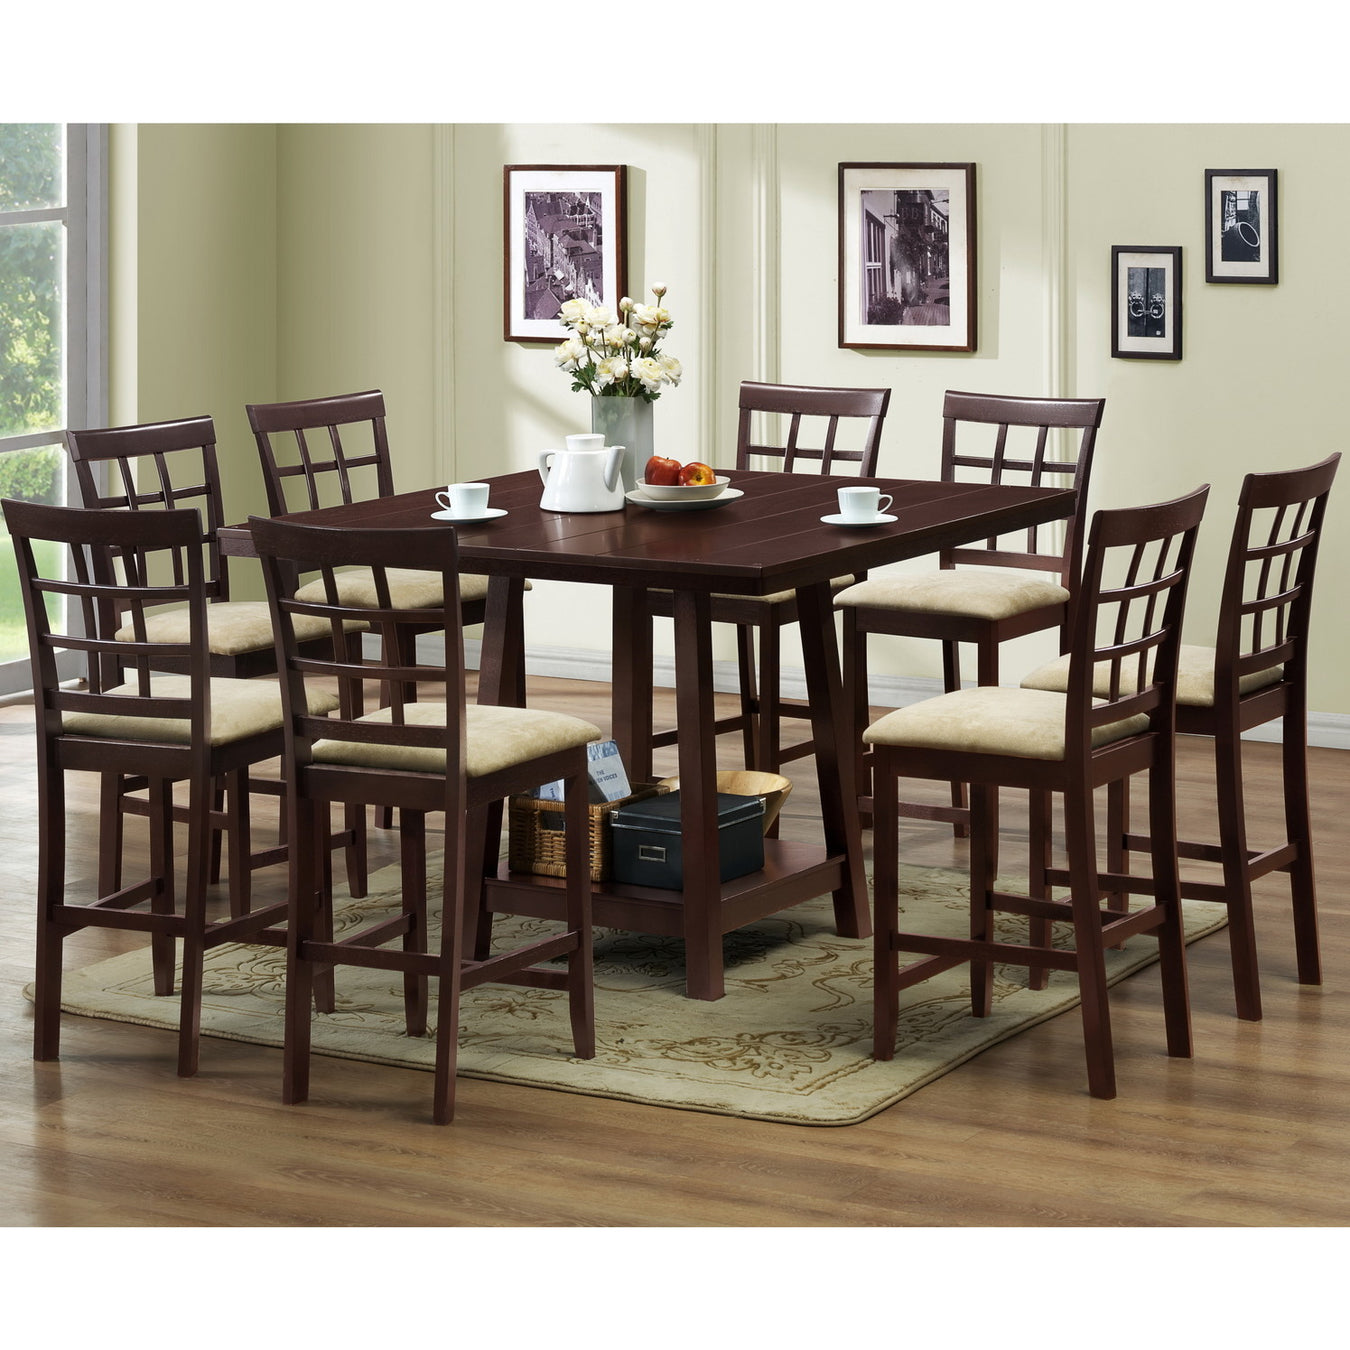 Wholesale Interiors Dining Sets